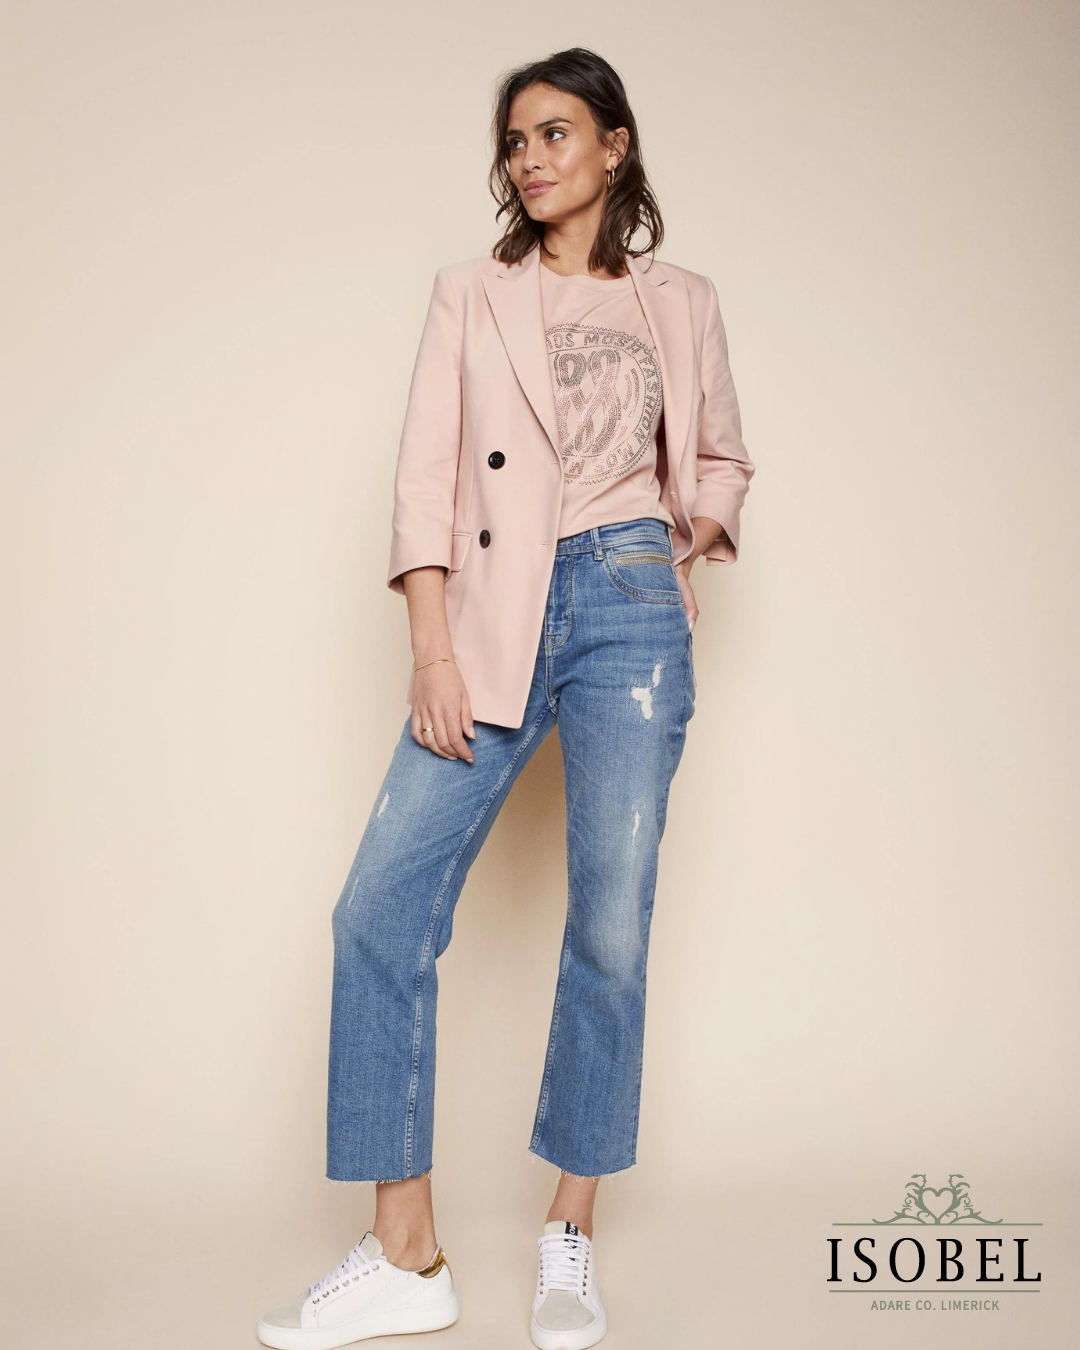 Everly Archive Jeans